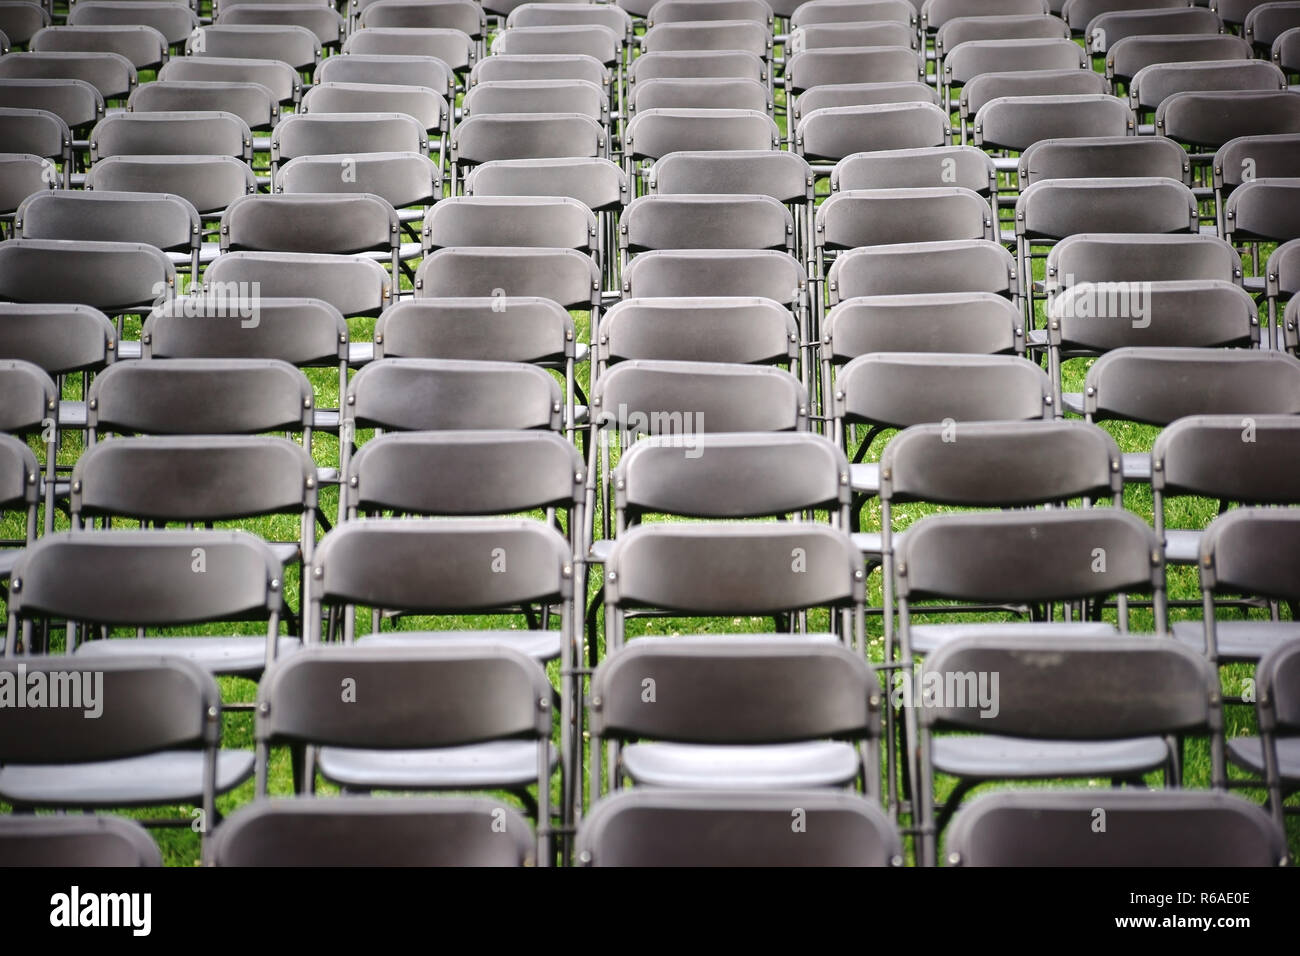 Seat Rows Concert Stock Photo